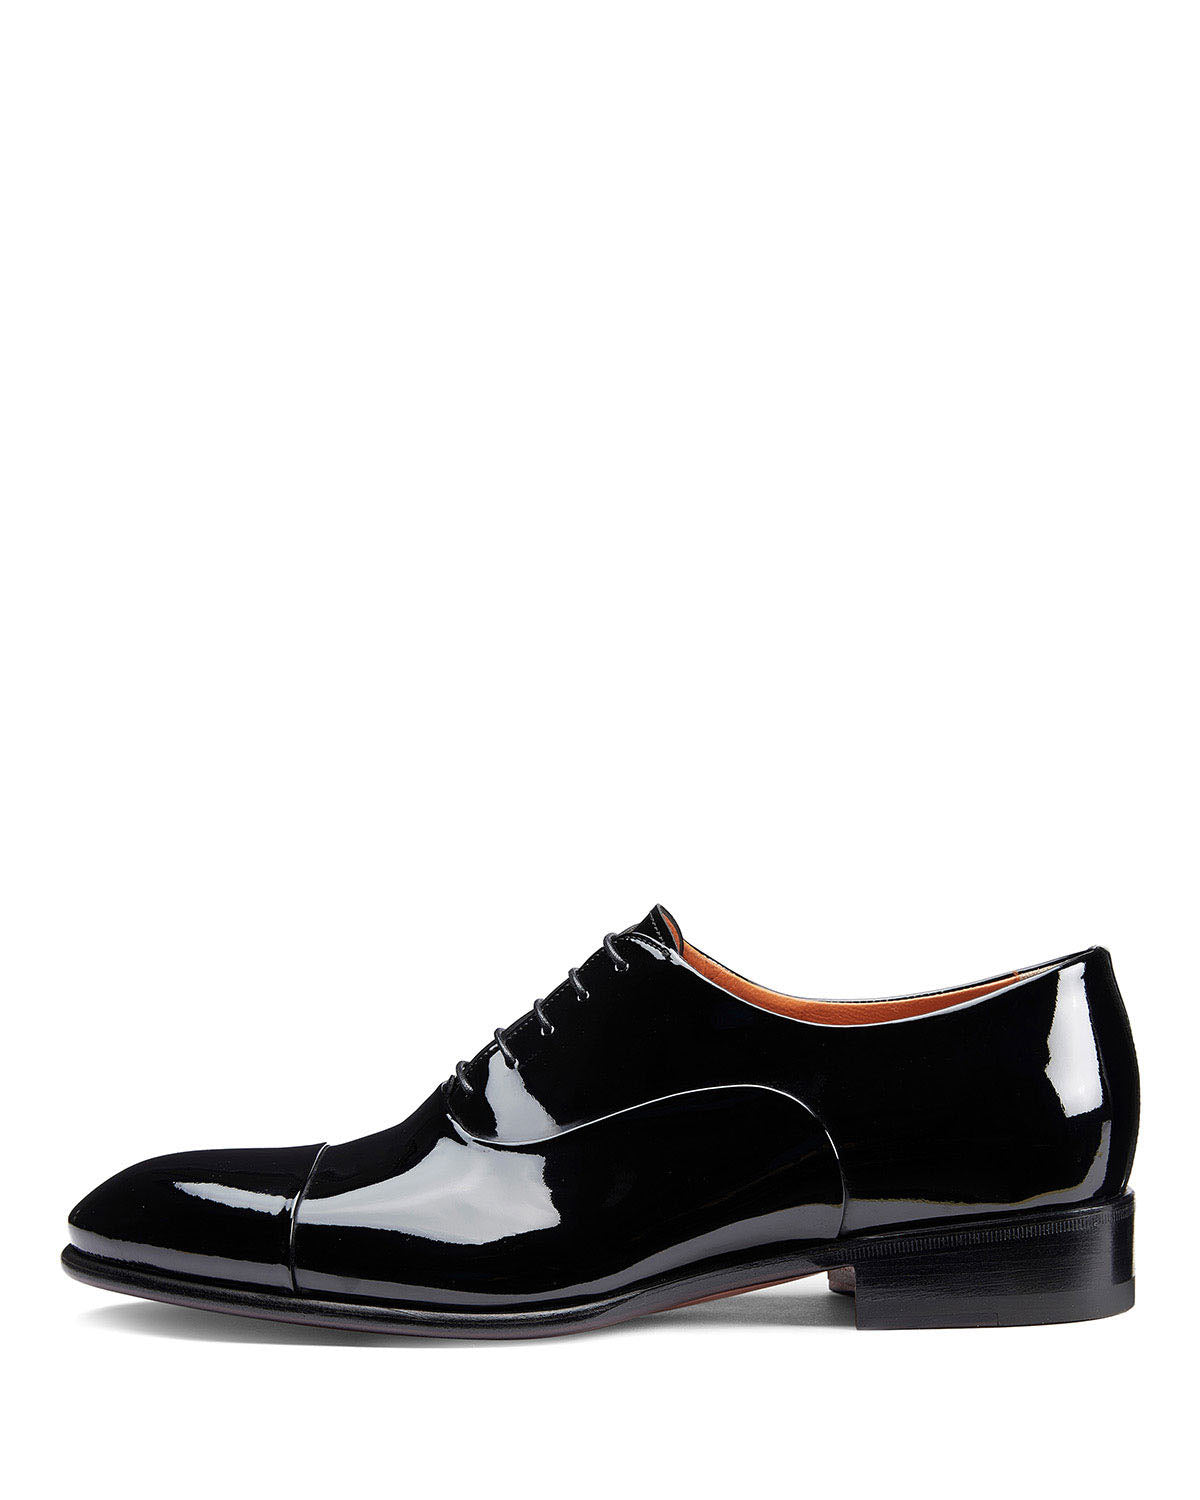 Black Patent Leather Formal Toe Cap Oxford Lace Up Shoes for Men with Leather Sole. Goodyear Welted Construction Available.